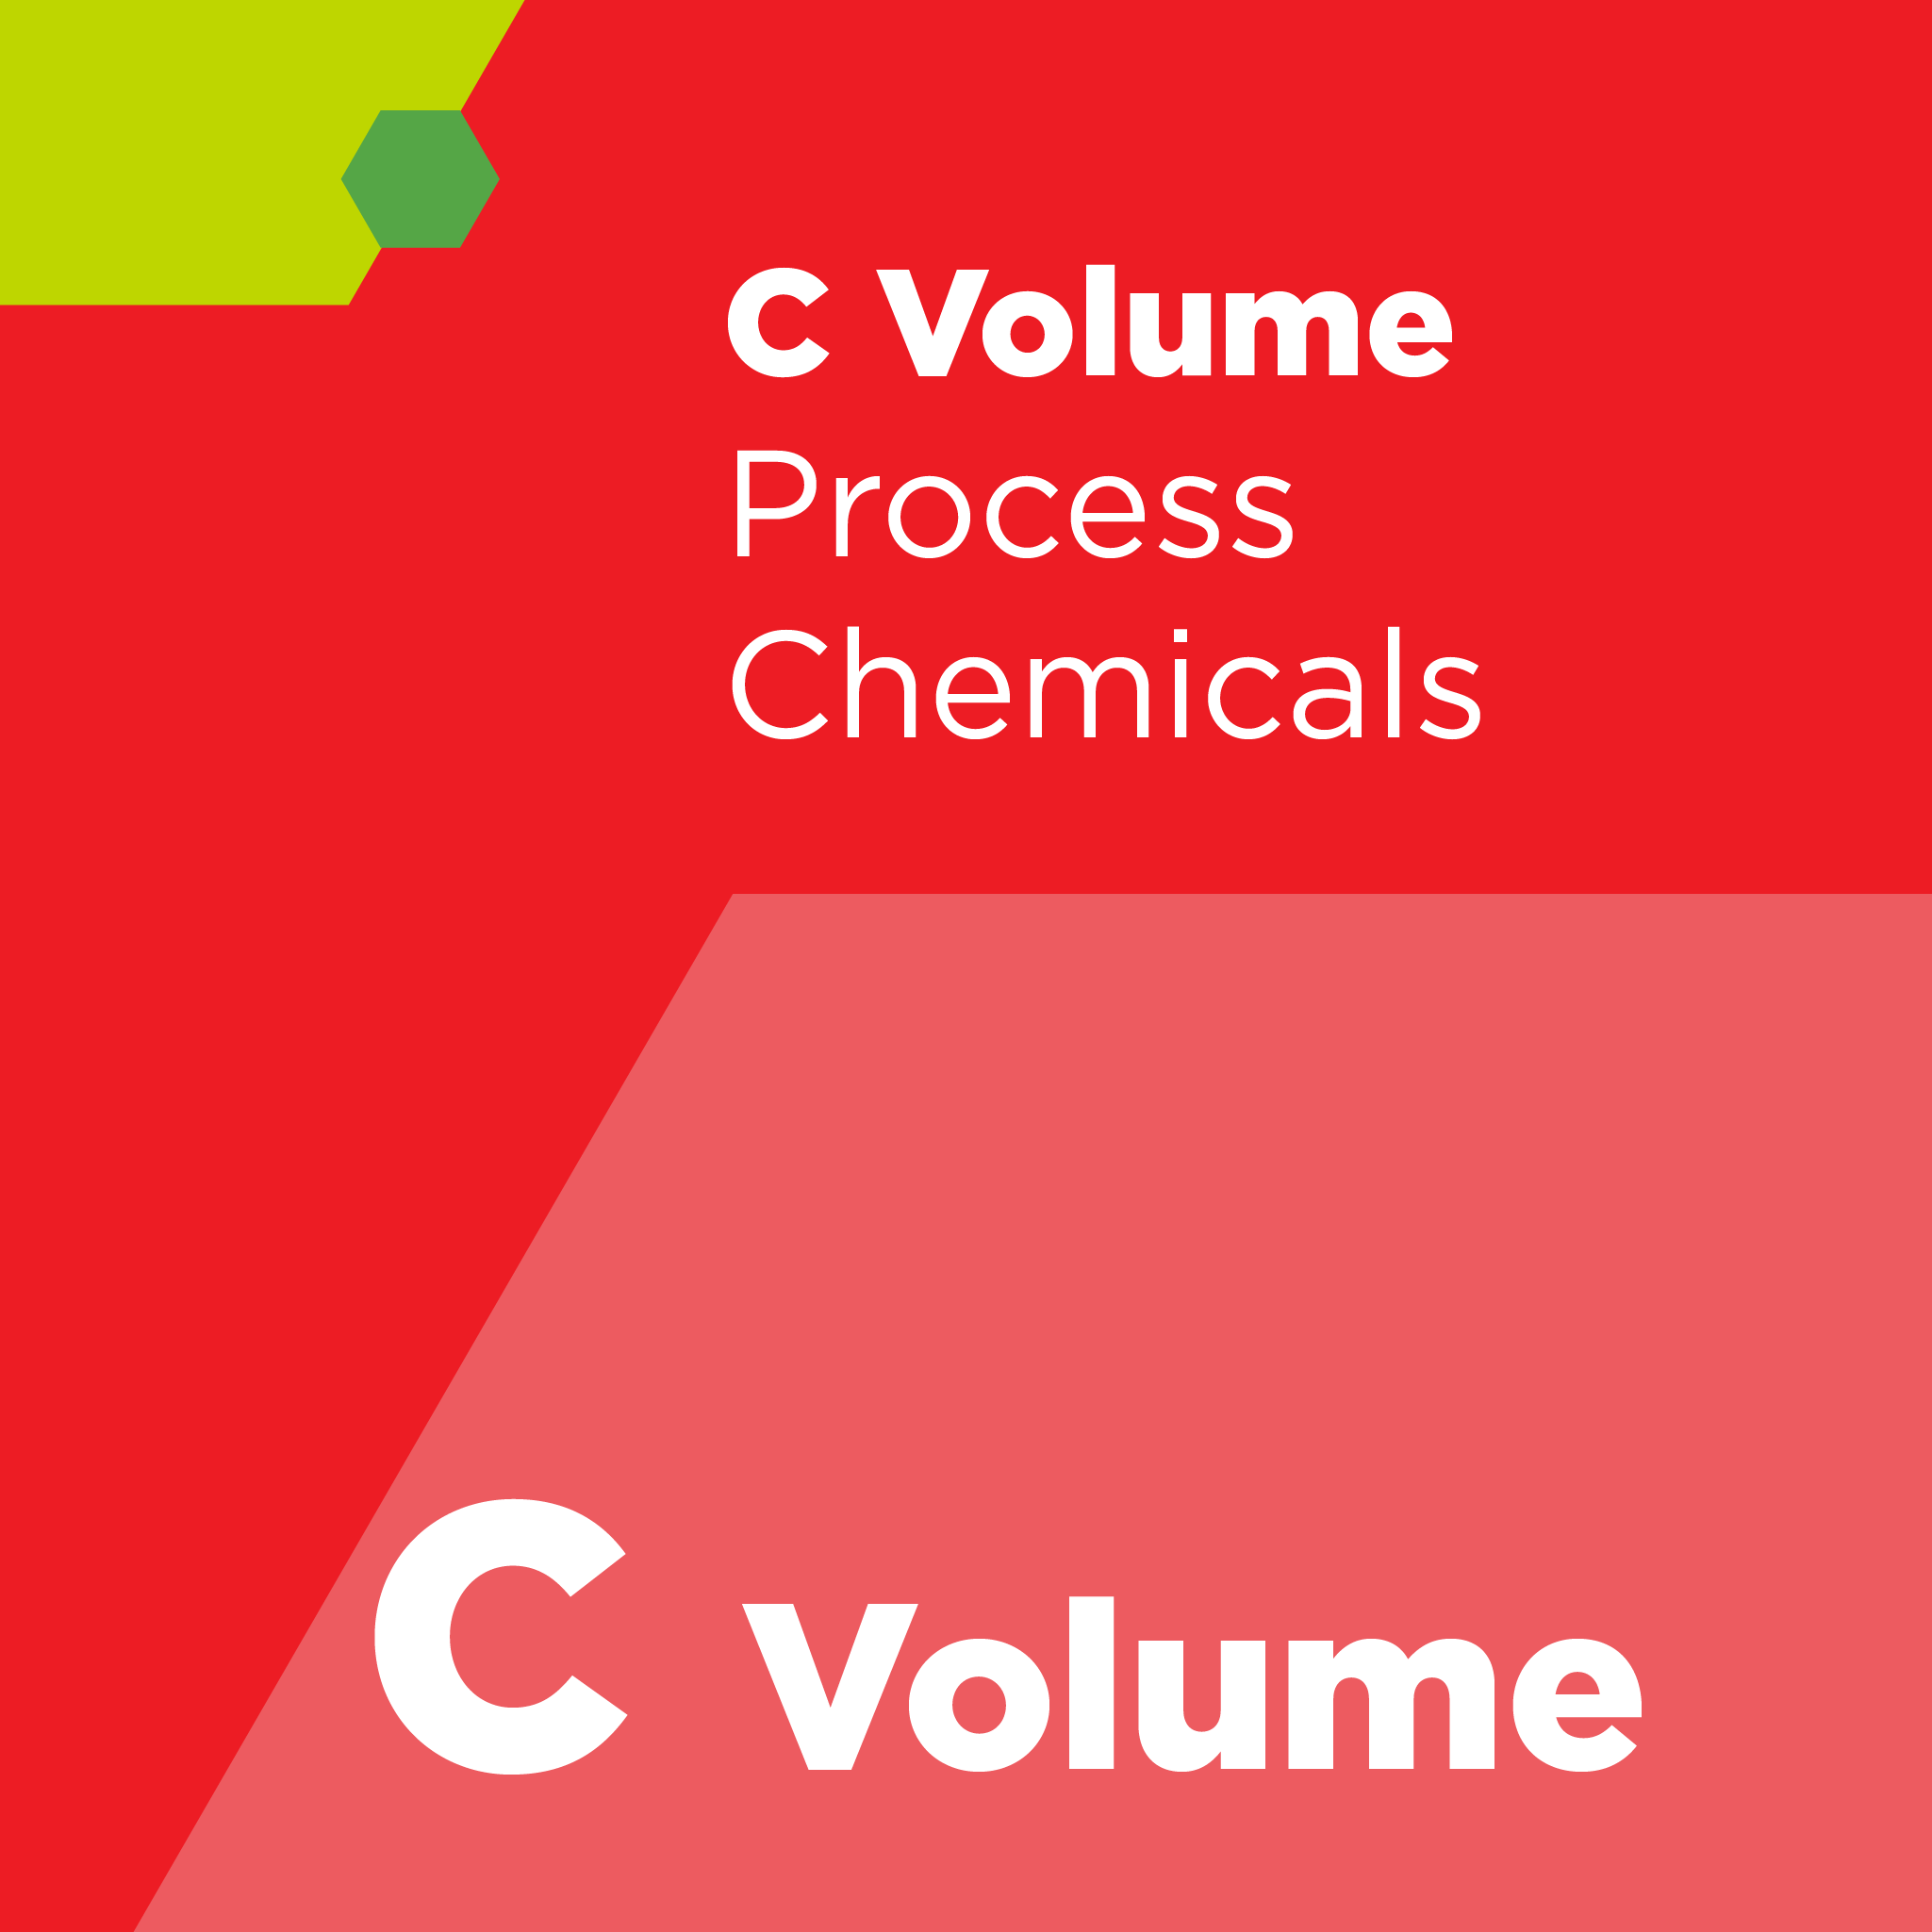 C02100 - SEMI C21 - Specification and Guide for Ammonium Hydroxide